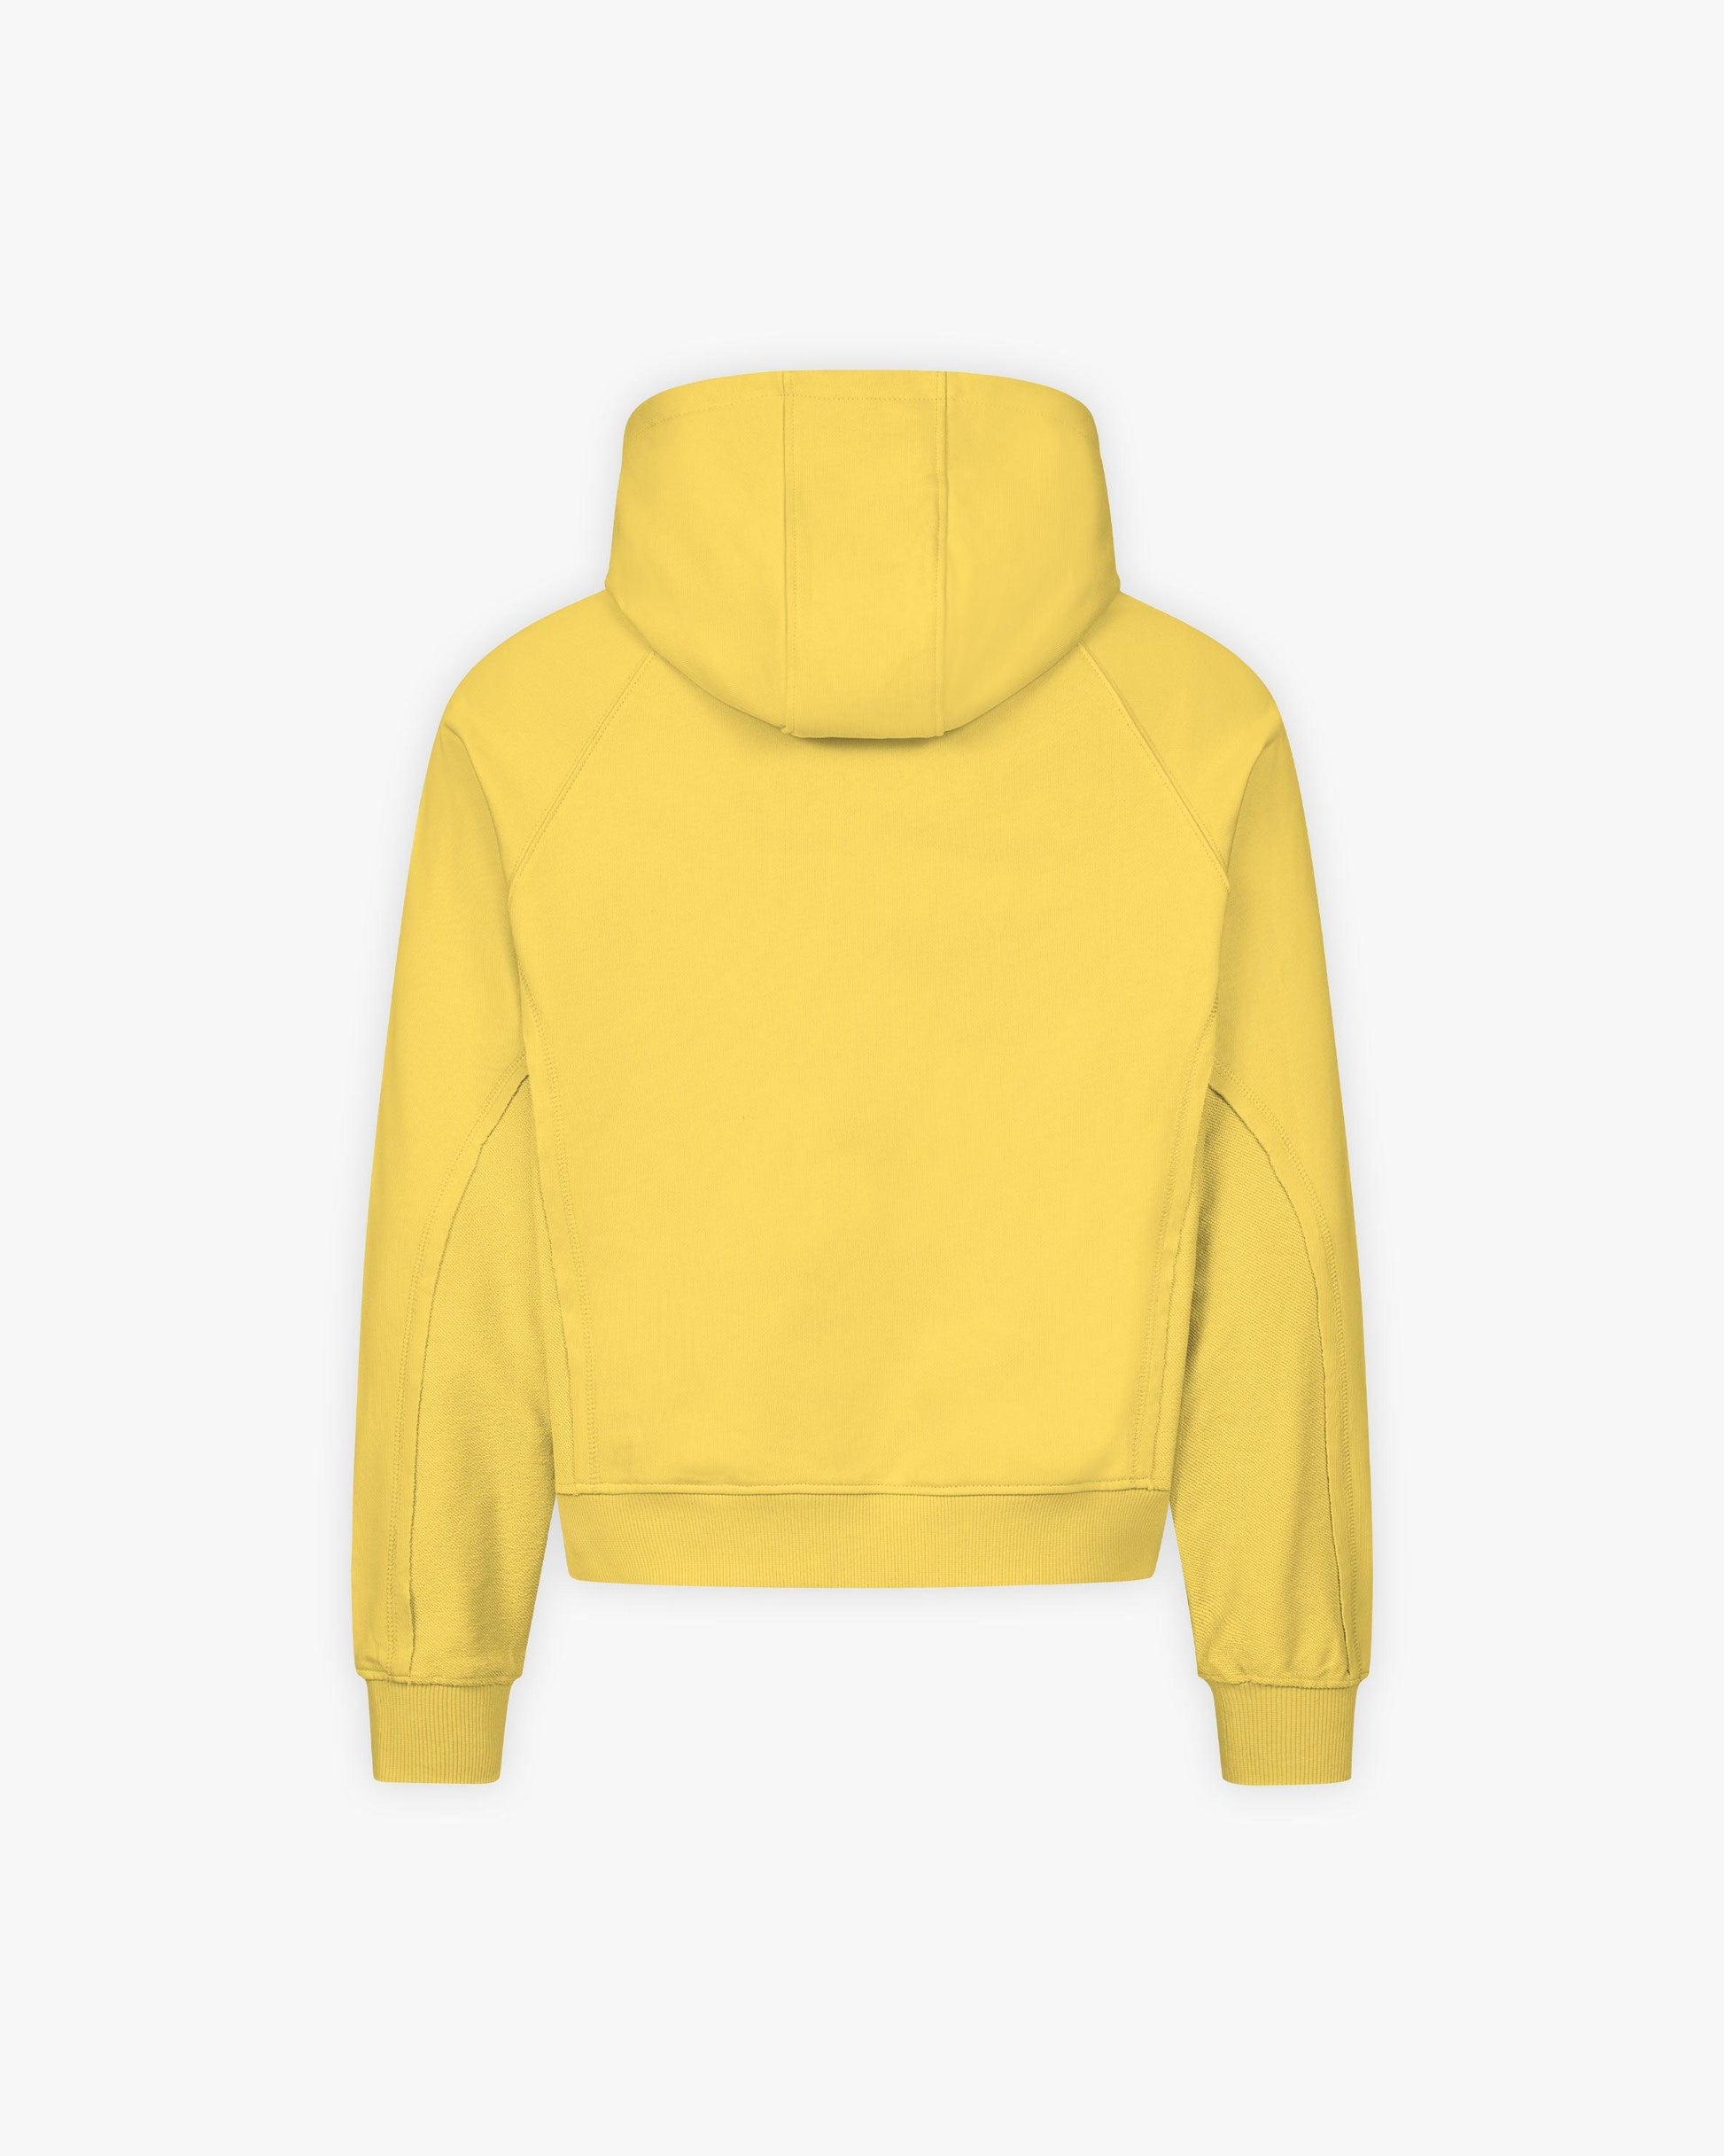 INSIDE OUT HOODIE SUNFLOWER - VICINITY